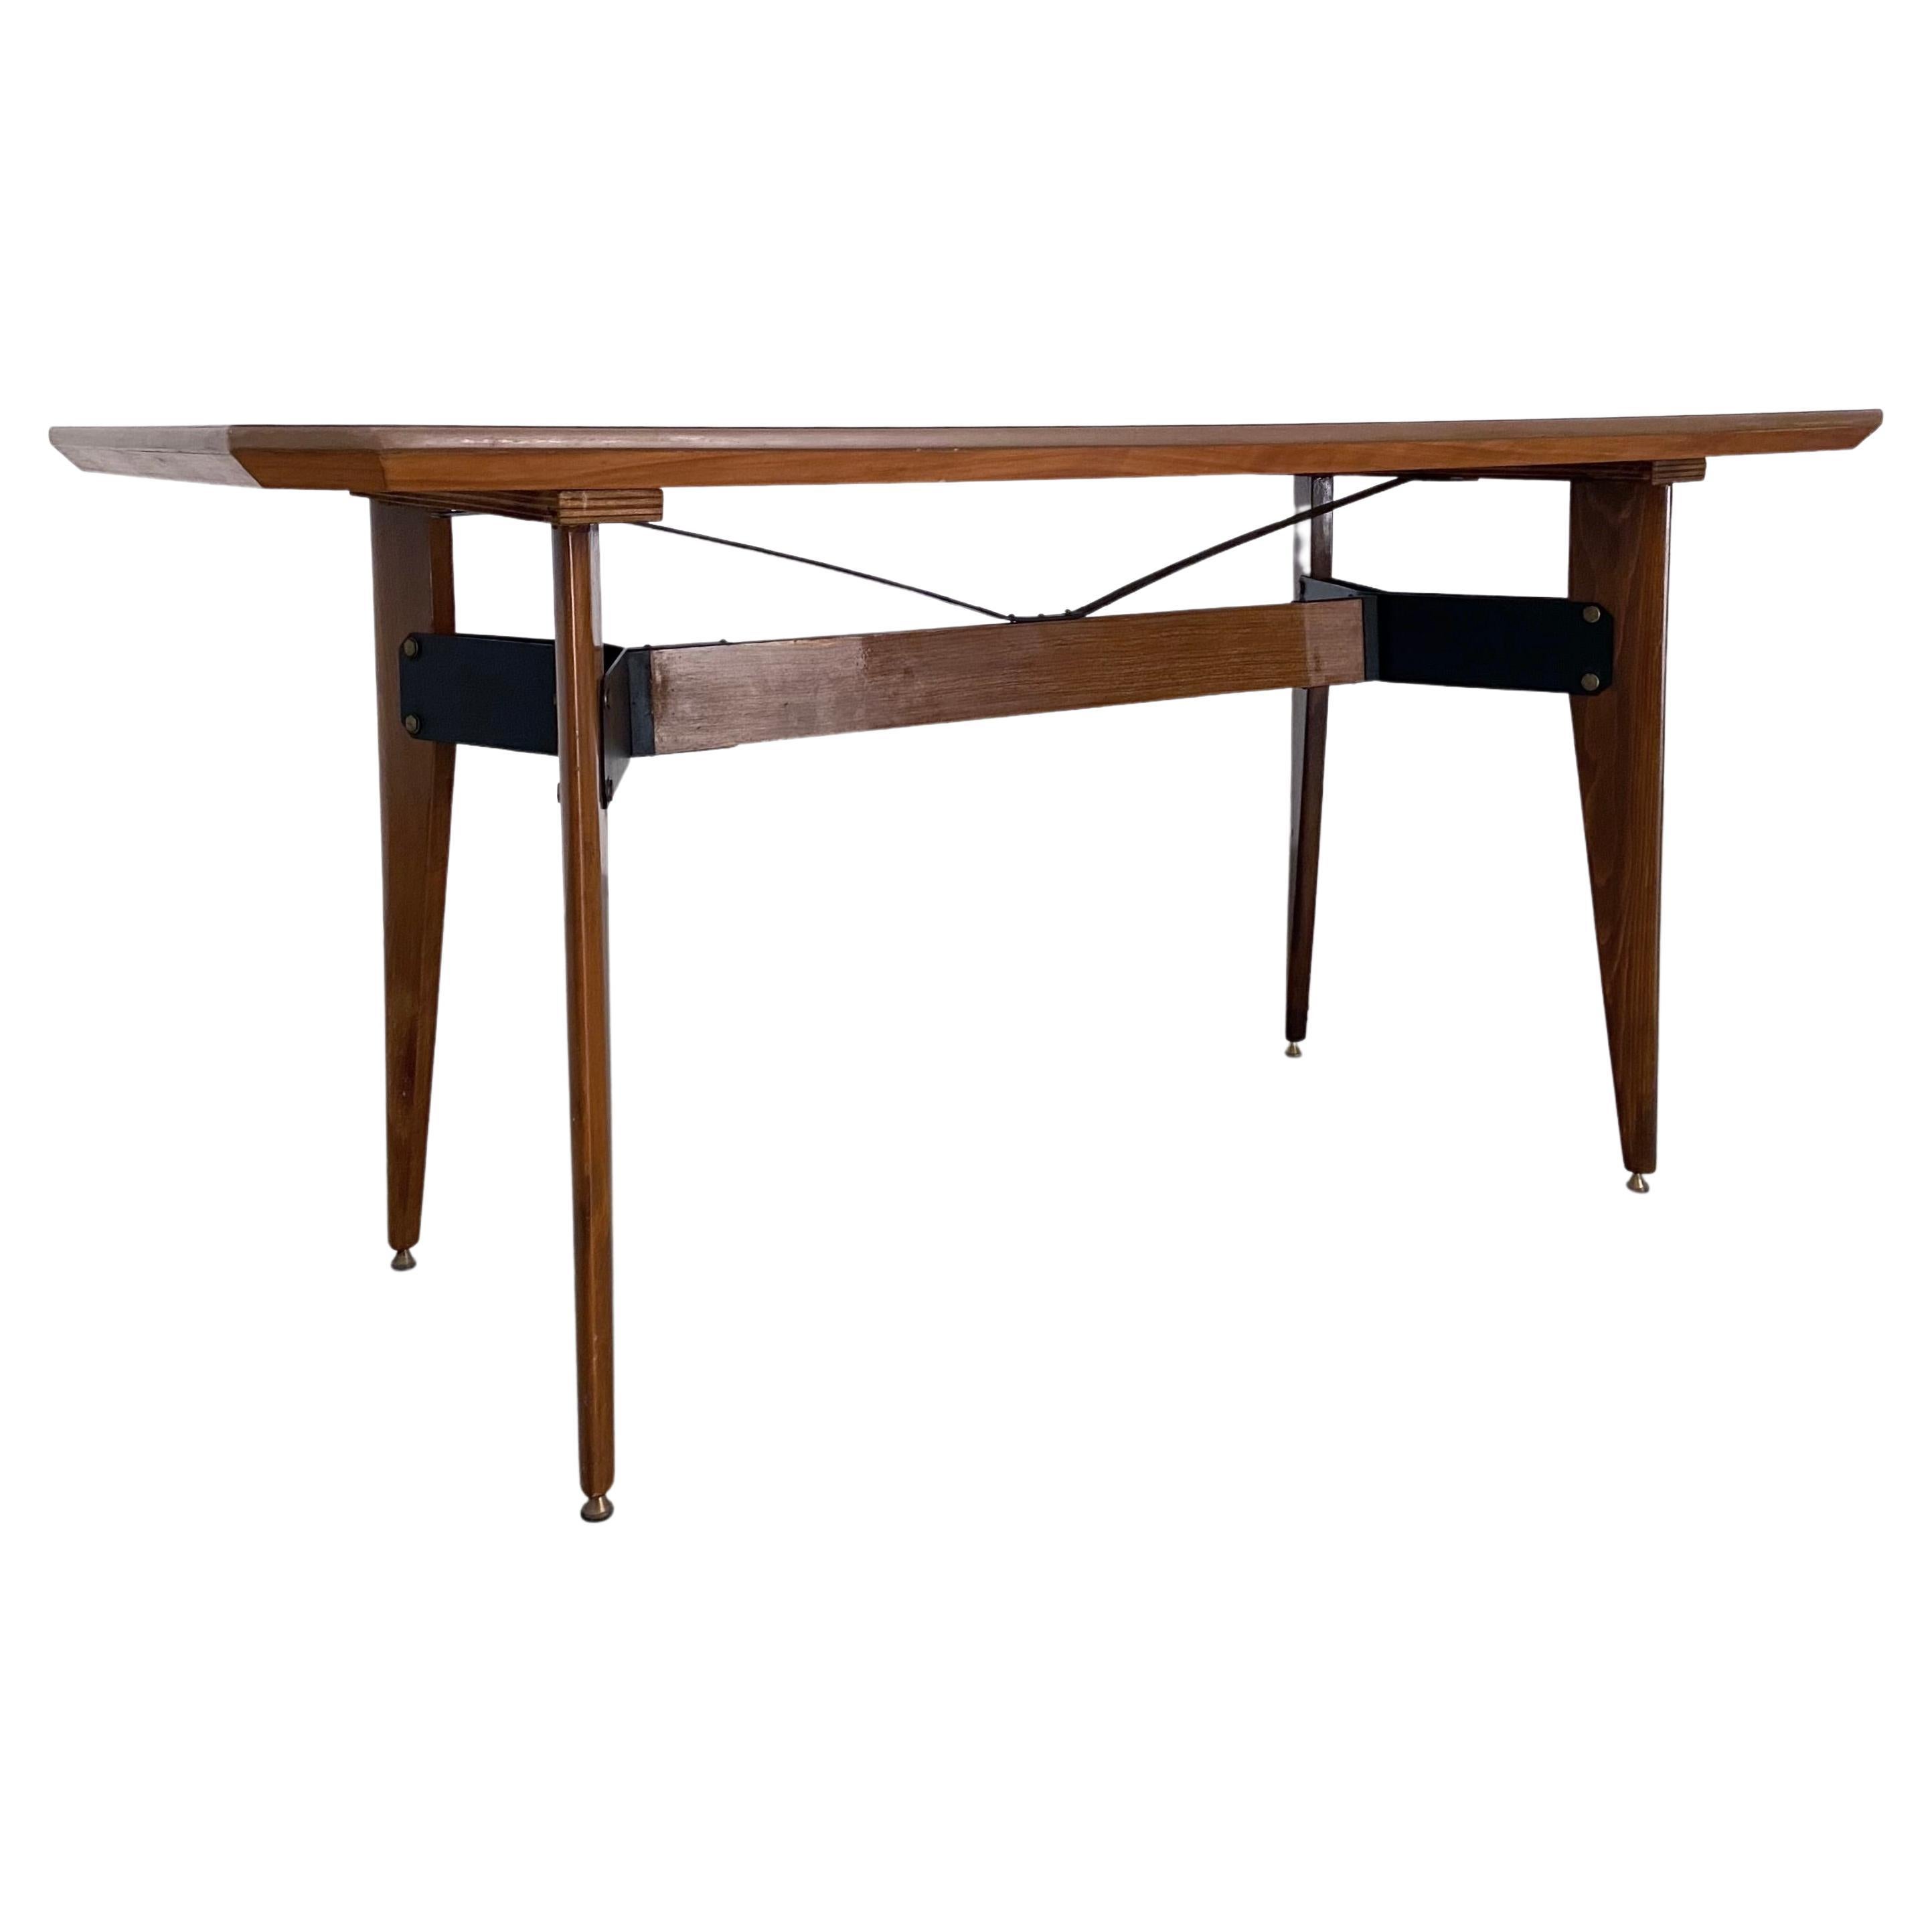 Carlo Ratti Dining Table in Wood and Metal, Italy, 1960's